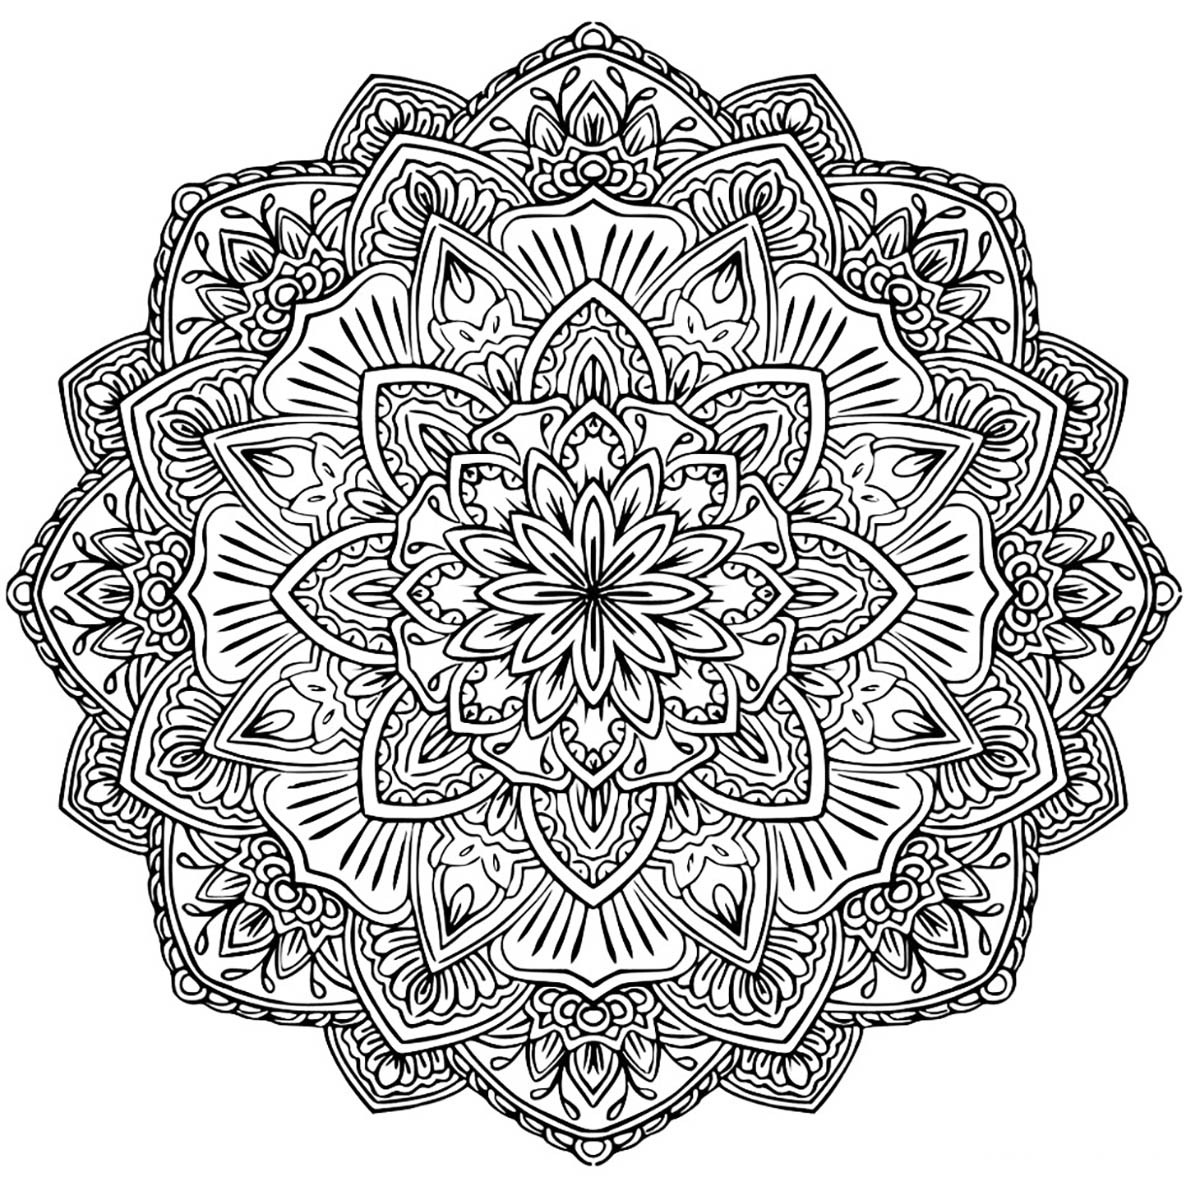 Mandala Coloring Pages Pdf
 Mandala to in pdf 1 M&alas Adult Coloring Pages